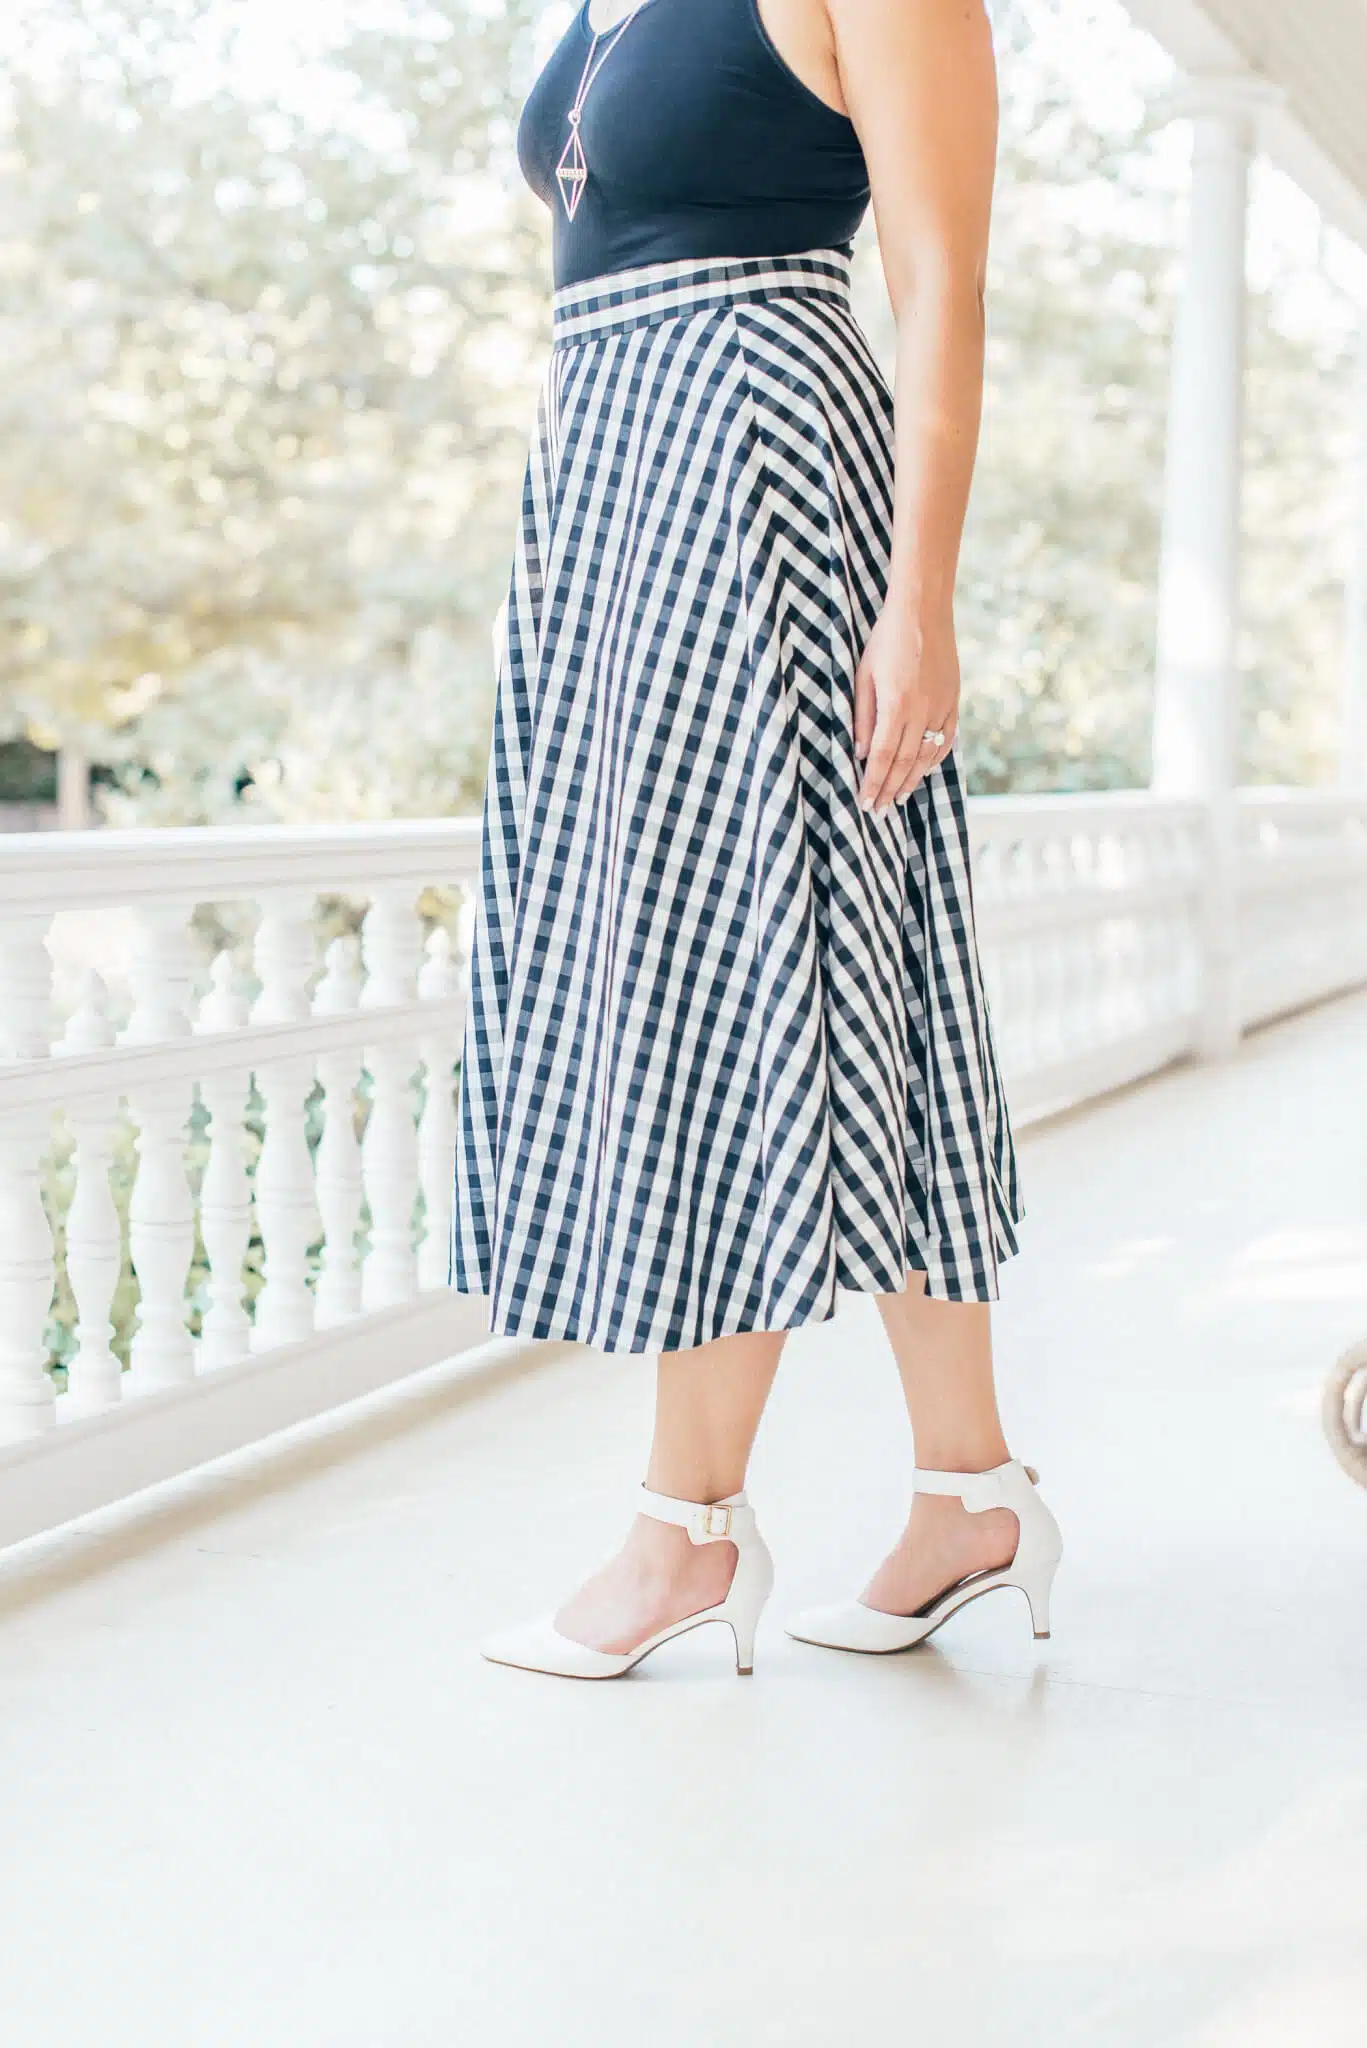 Amazon | Vacation | Travel Style | Kate Spade Gingham Circle Skirt in the Napa Valley featured by top San Francisco fashion blog What The Fab